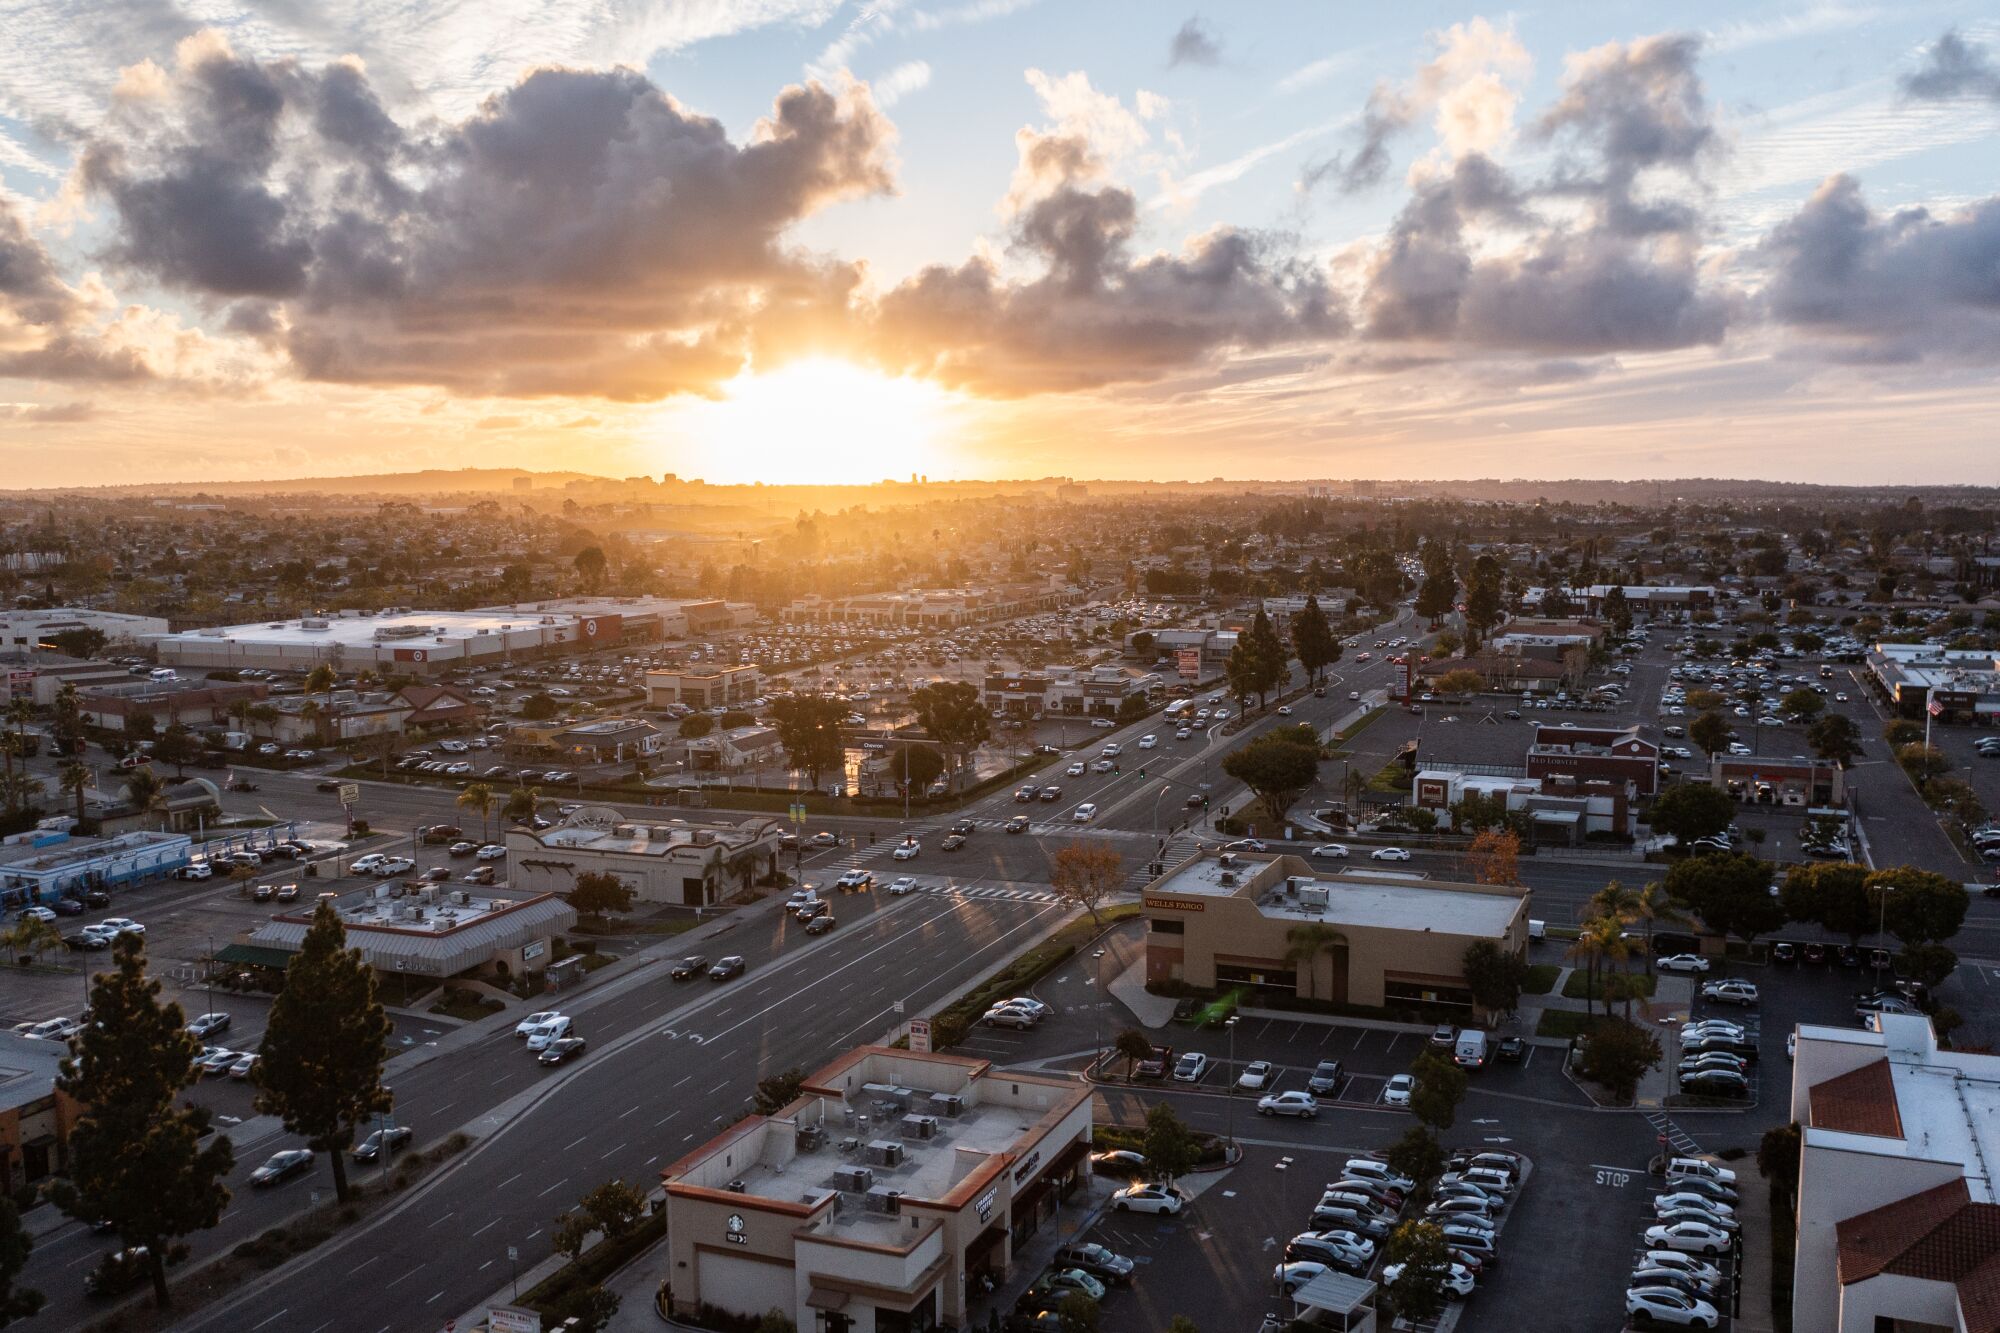 An aerial view of a suburban strip-mall neighborhood at sunset.